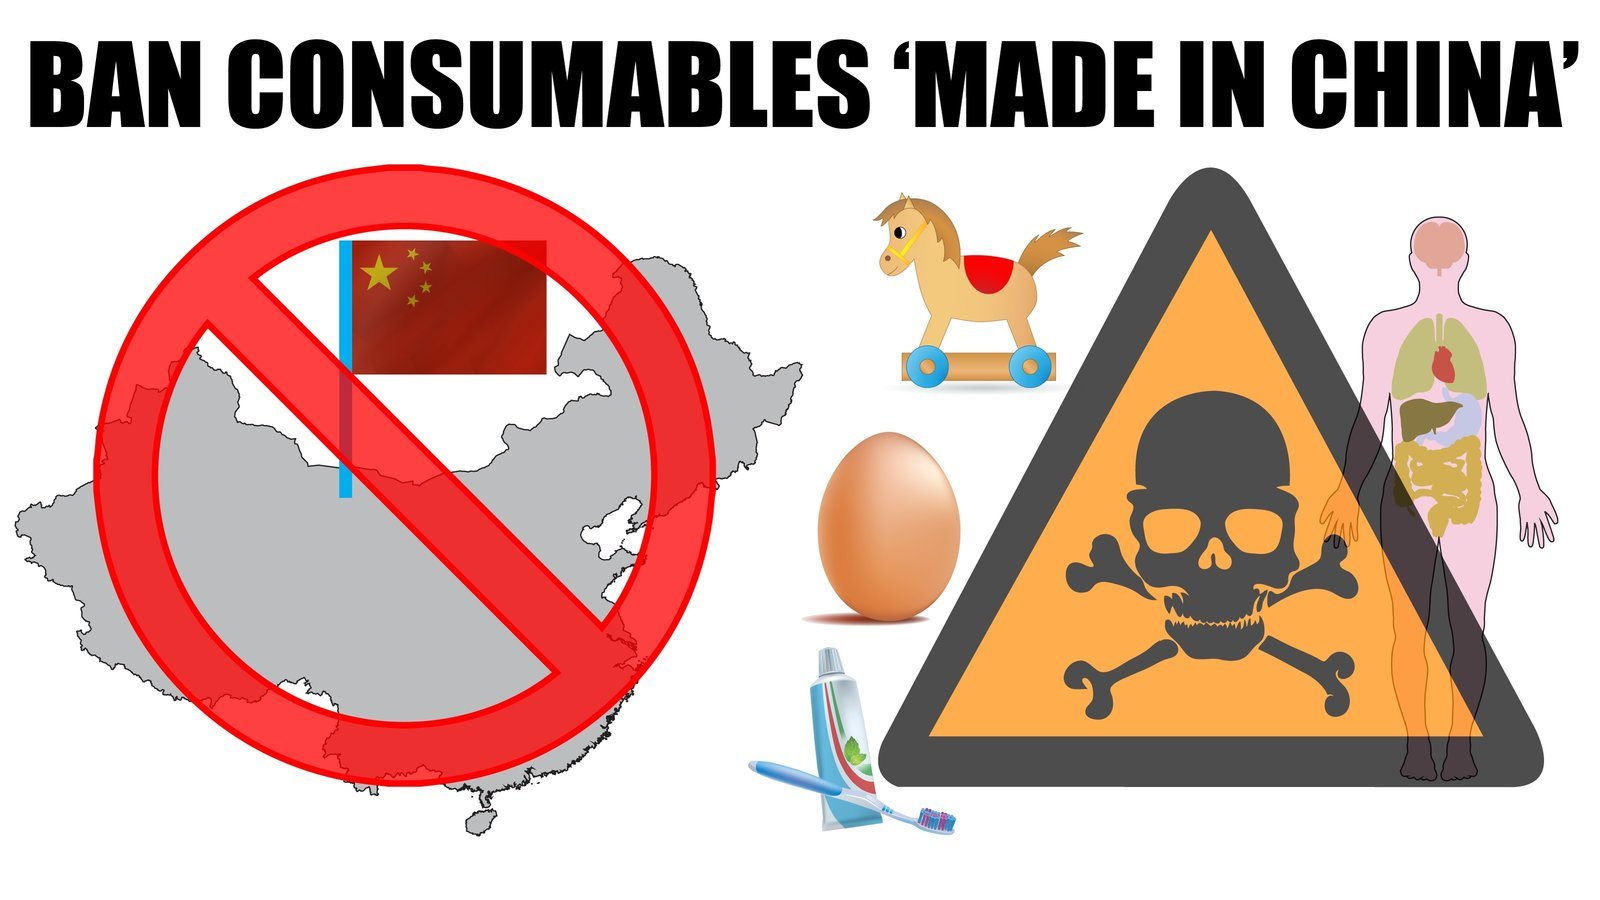 Sign Now to Ensure Safety of Indian Consumers!